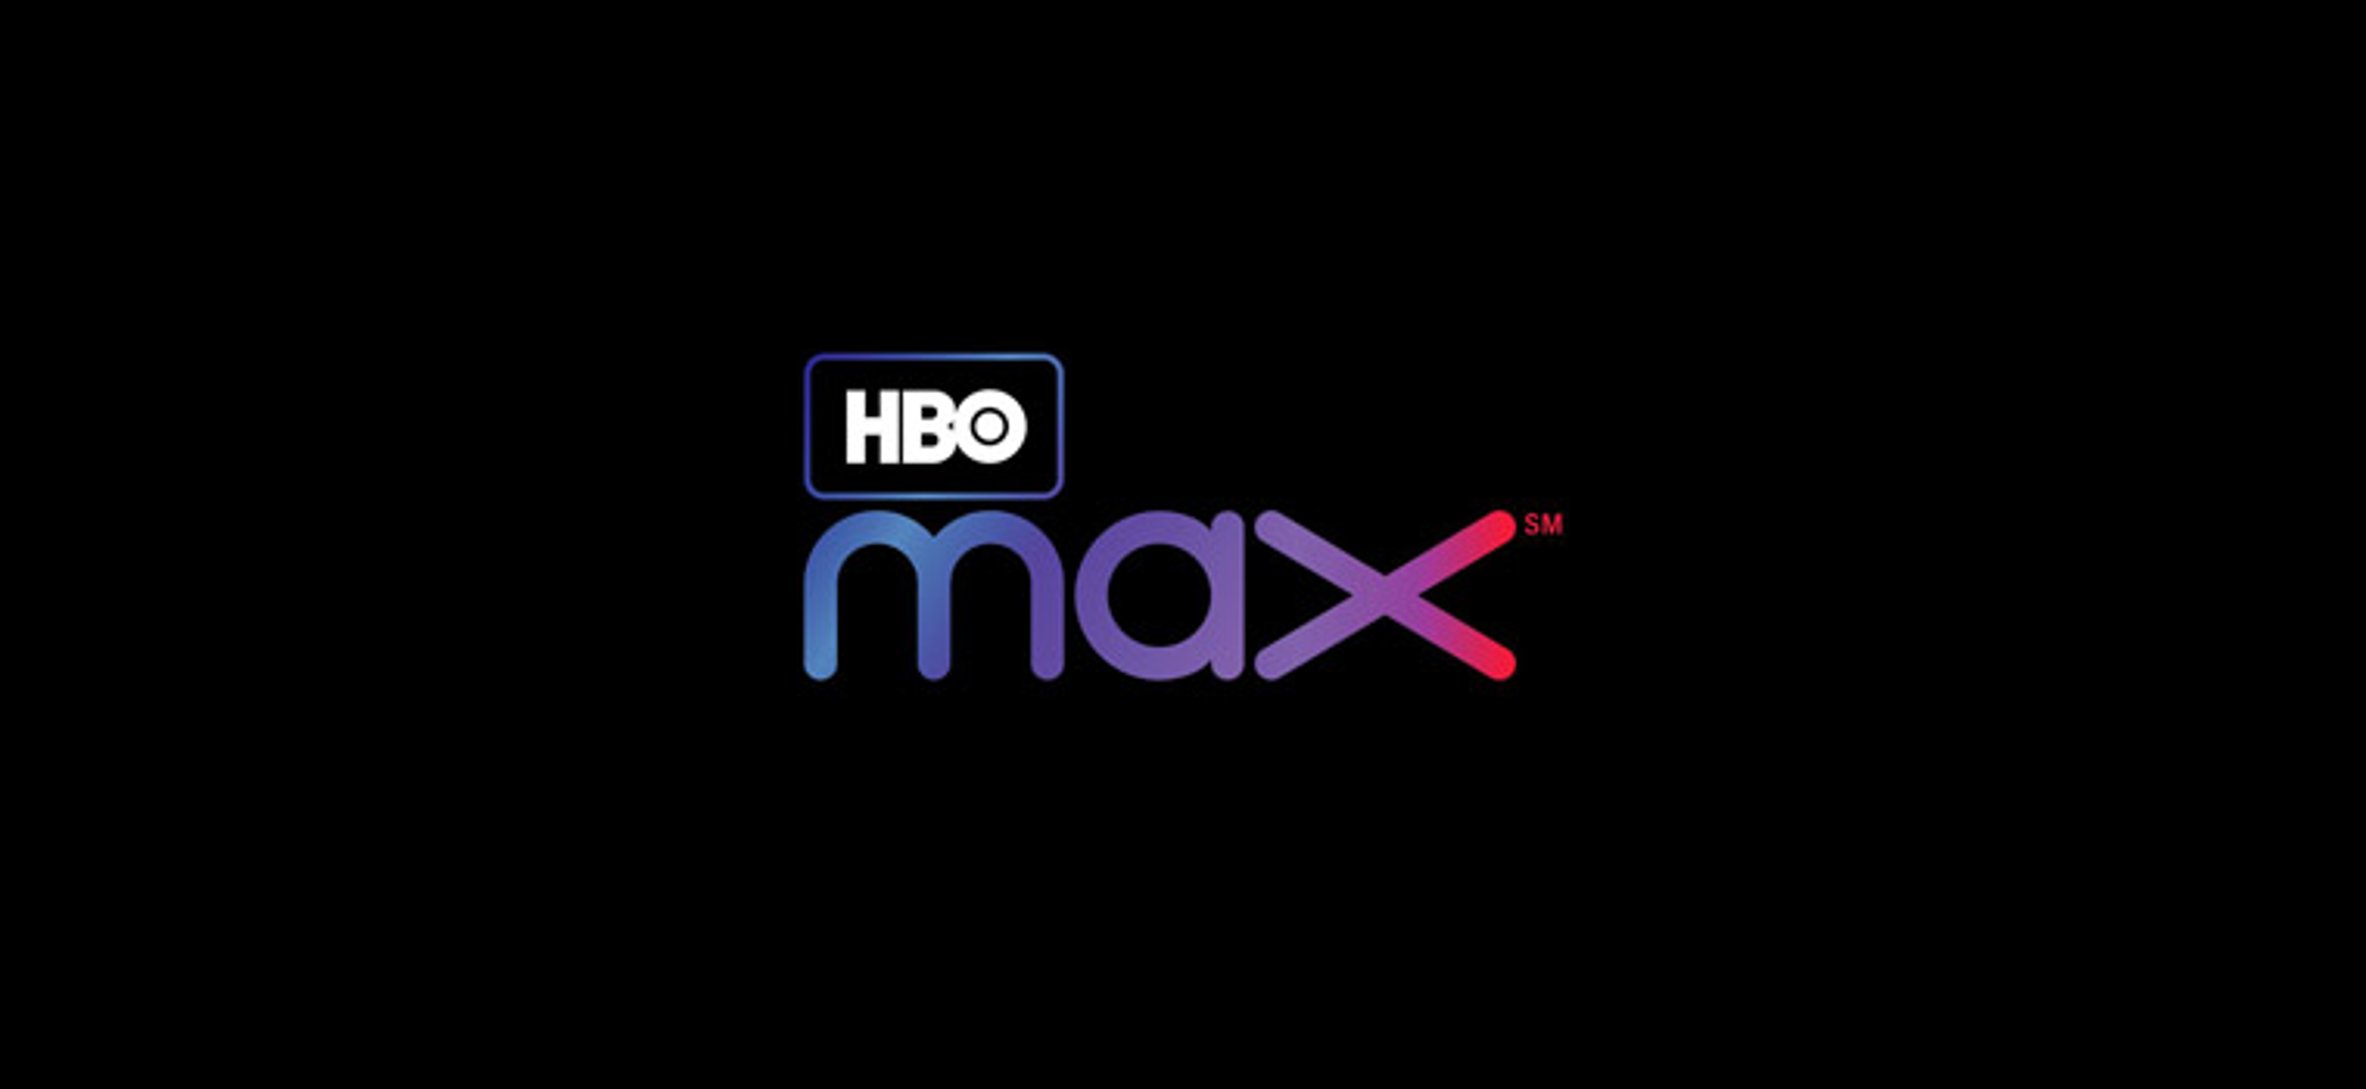 Casting photo doubles to work on the HBO Max Limited Series Staircase on Monday, 12/13/21 in Atlanta, GA.